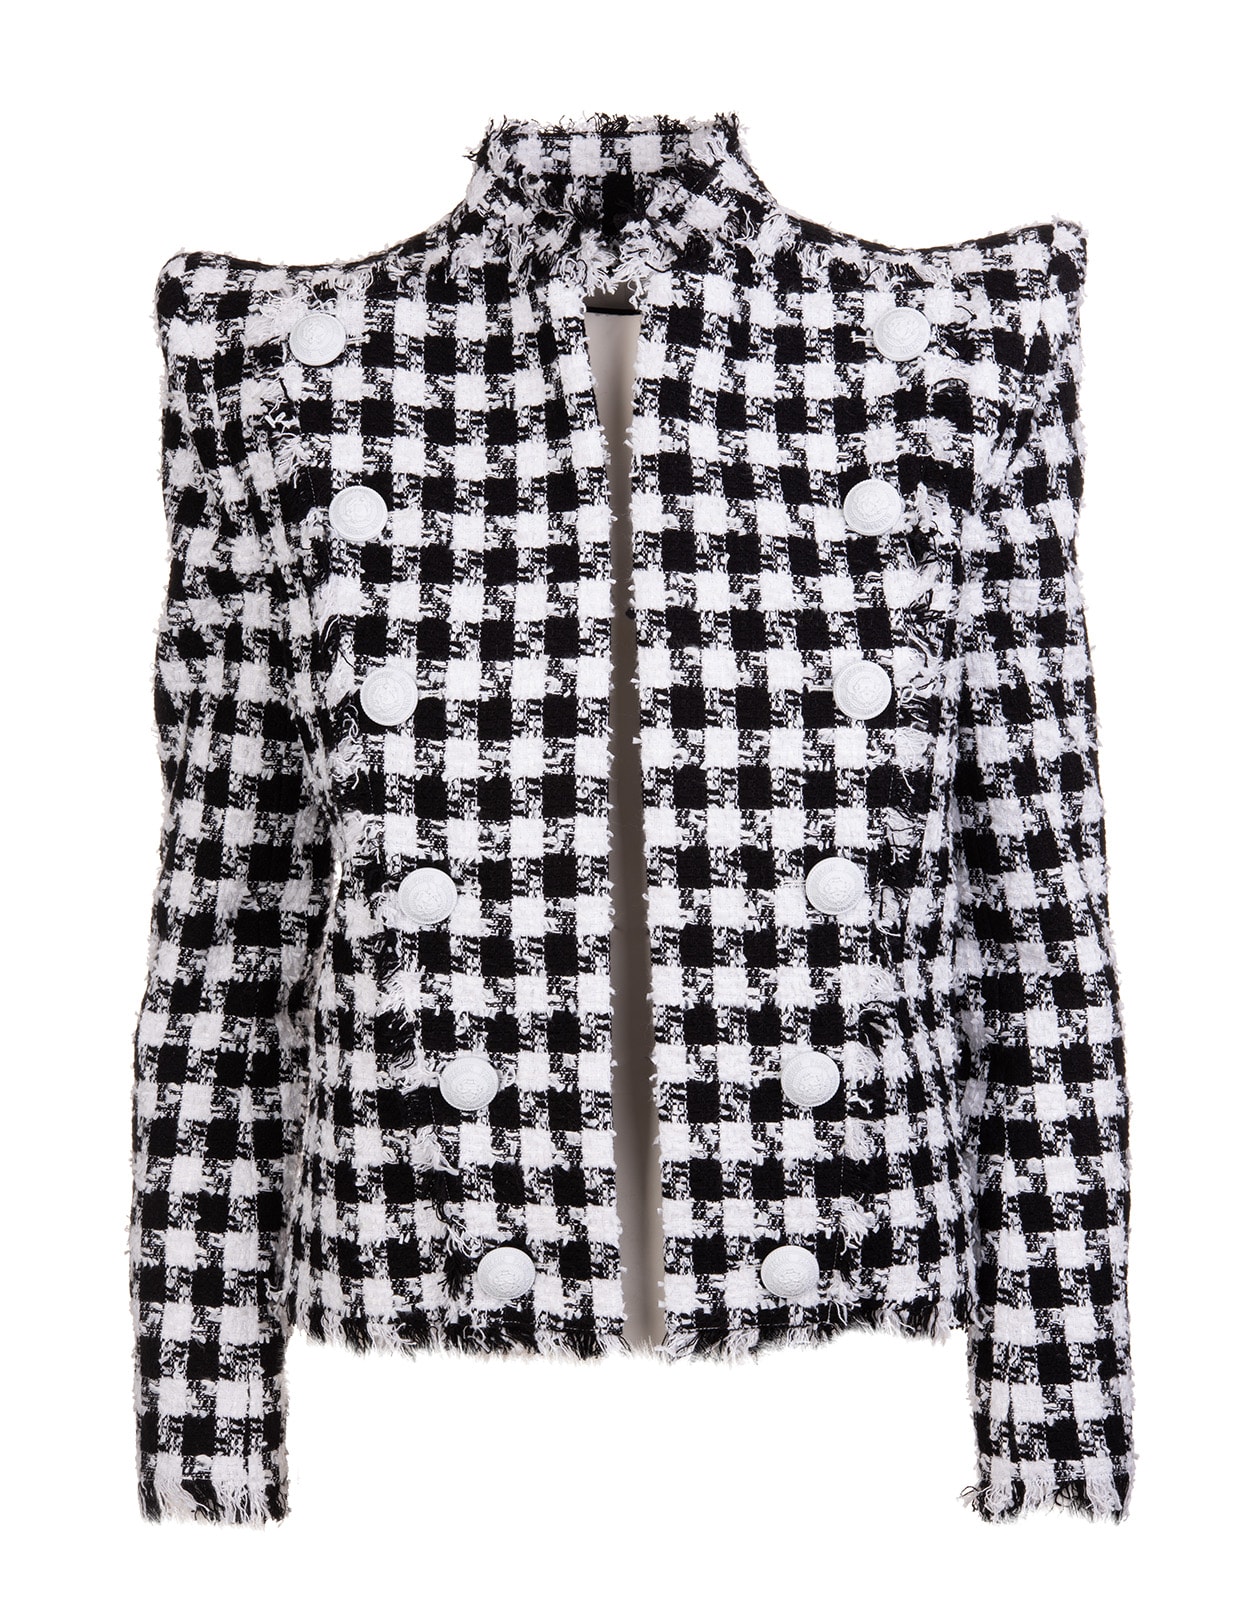 Balmain Black And White Tweed Blazer With Houndstooth Motif And White Embossed Buttons